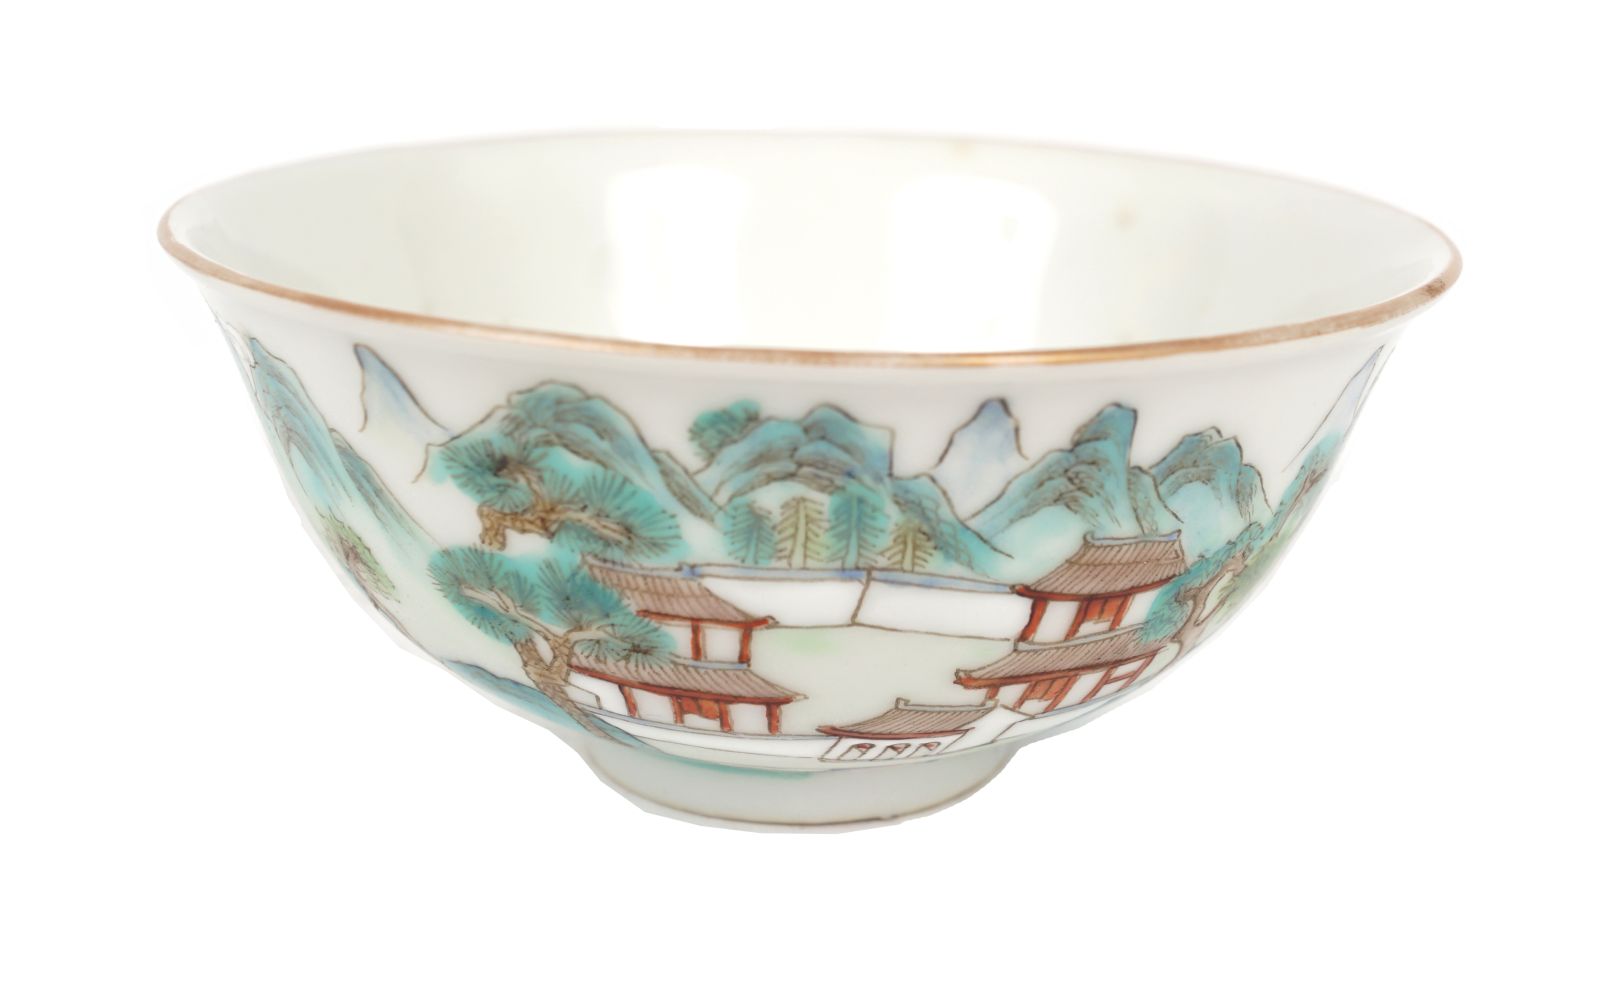 CHINESE DAOGUANG POLYCHROME PLATE